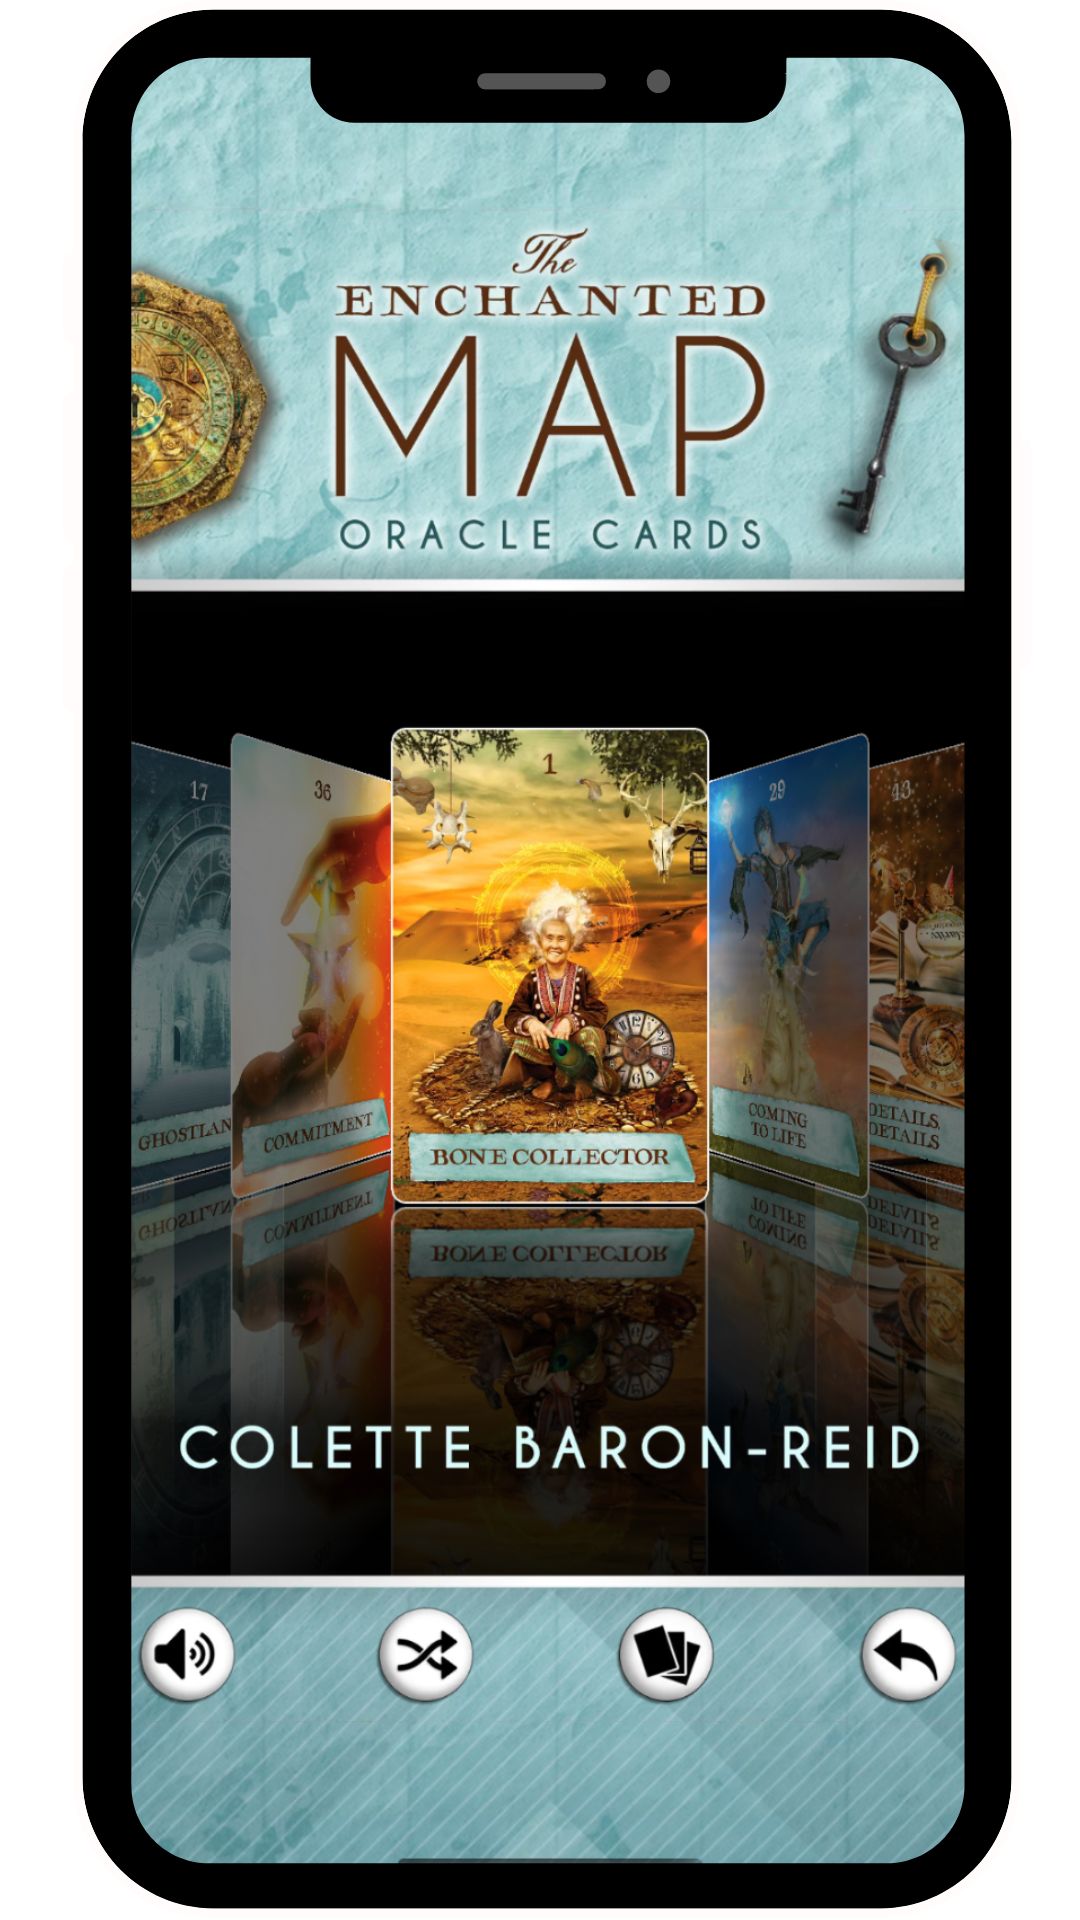 The Enchanted Map Oracle App by Colette Baron-Reid